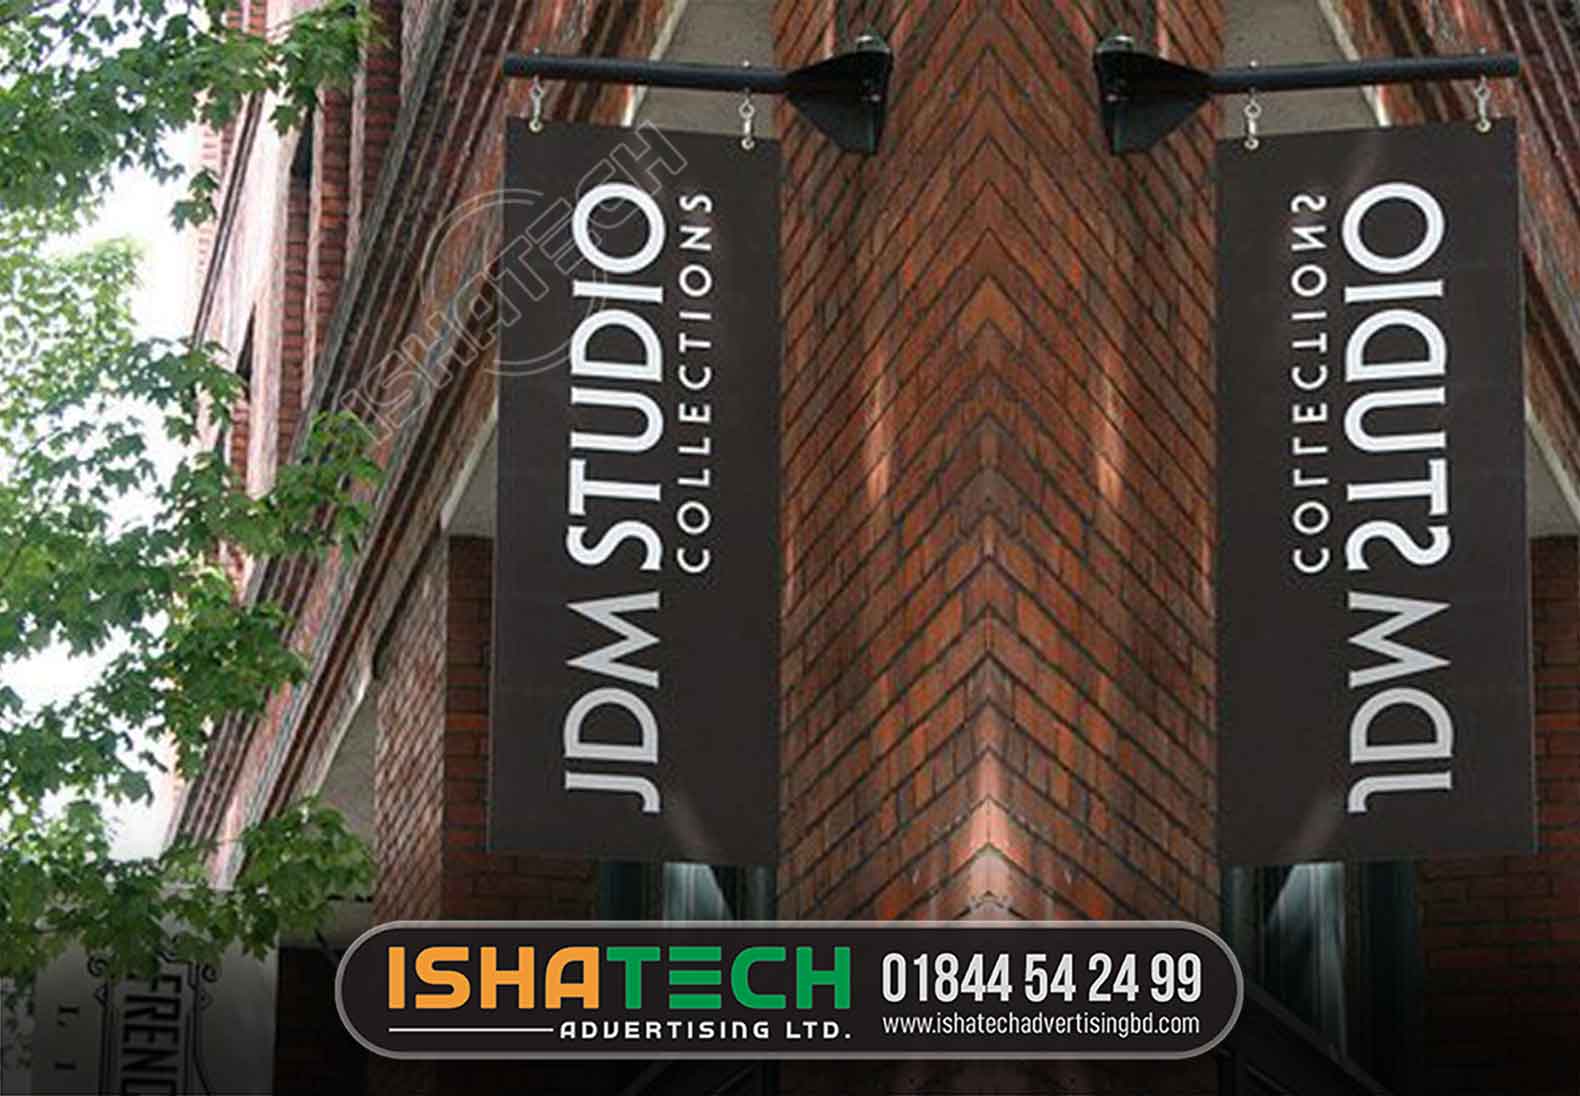 JDM STUDIO OUTDOOR VERTICAL ACRYLIC LETTER SIGNBOARD, PANA SIGNBOARD DESIGN AND MAKING BY ISHATECH ADVERTISING LTD